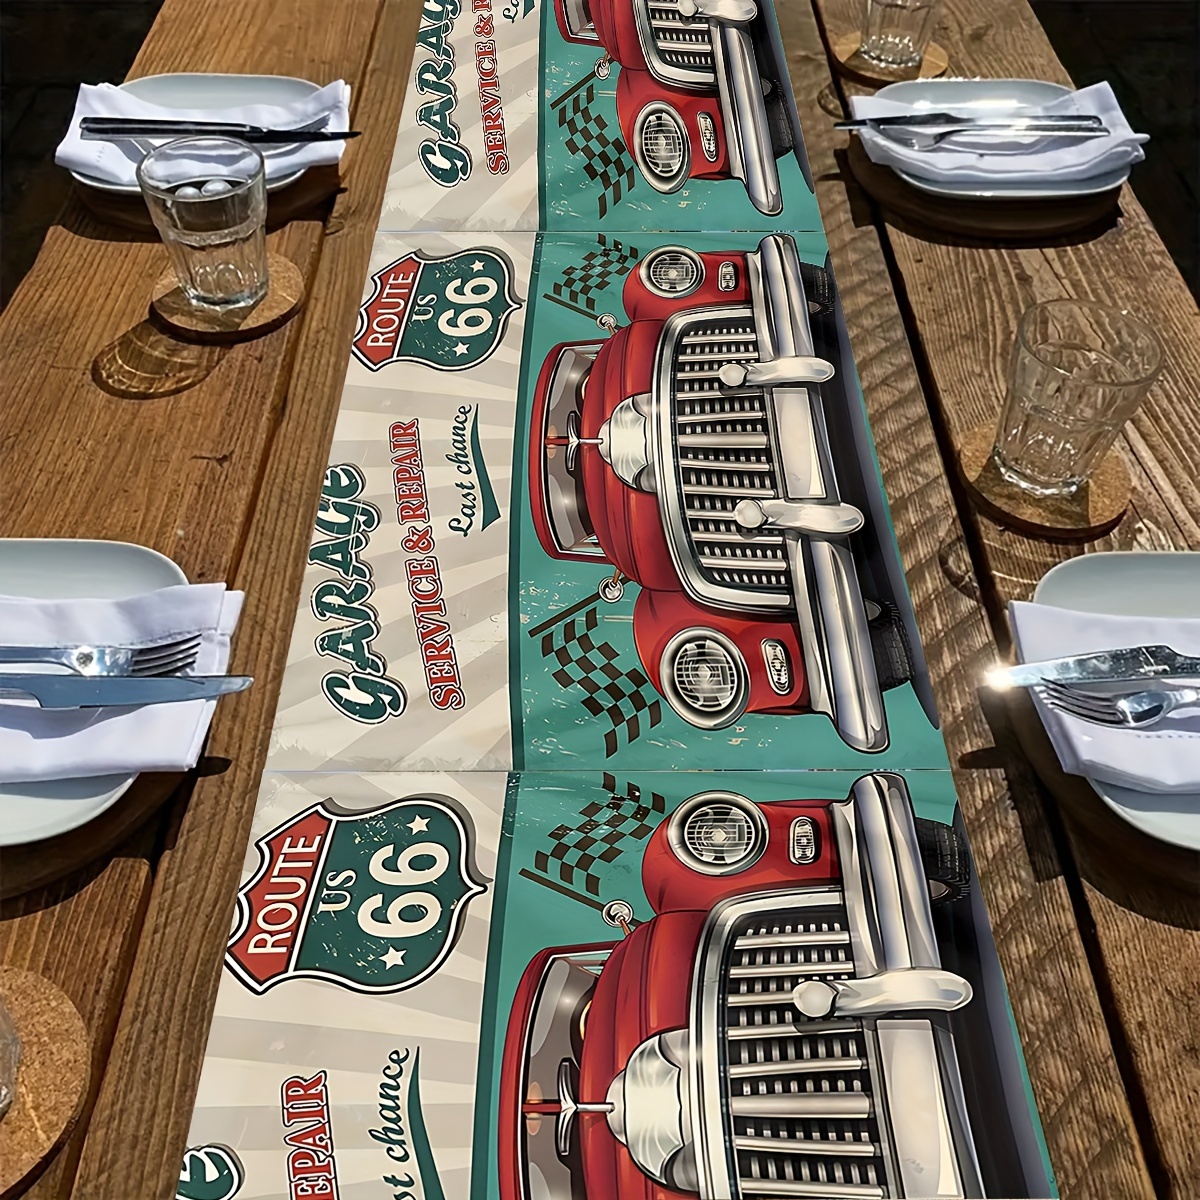 

Vintage Car-themed Table Runner: Retro 66 Route Design, Perfect For Your Bohemian Kitchen Or Party Decor - Made Of Durable Polyester